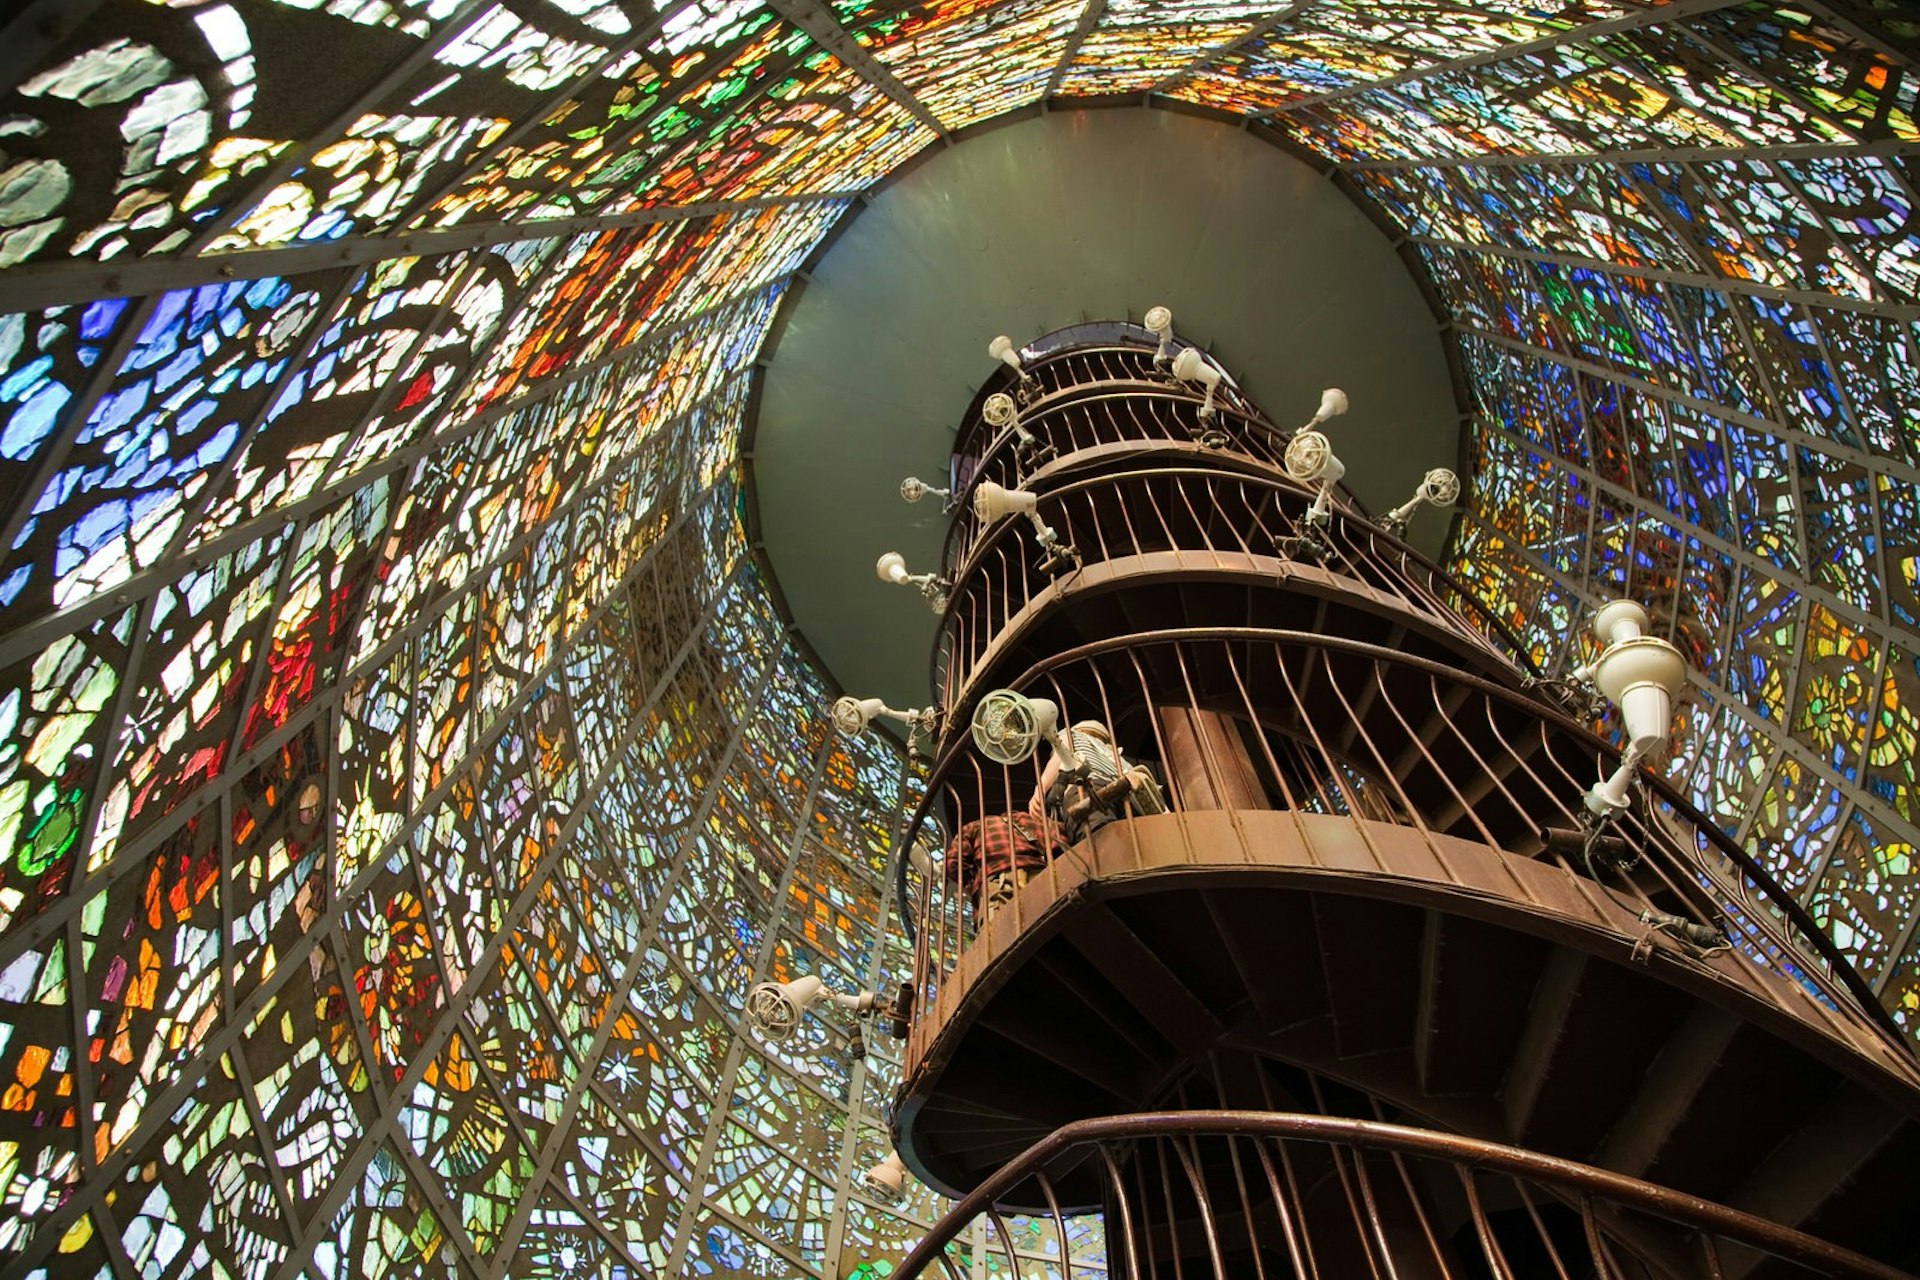 The extraordinary stained glass 'Symphonic Sculpture' by Gabriel Loire at the Hakone Open Air Museum © John S Lander / Getty Images